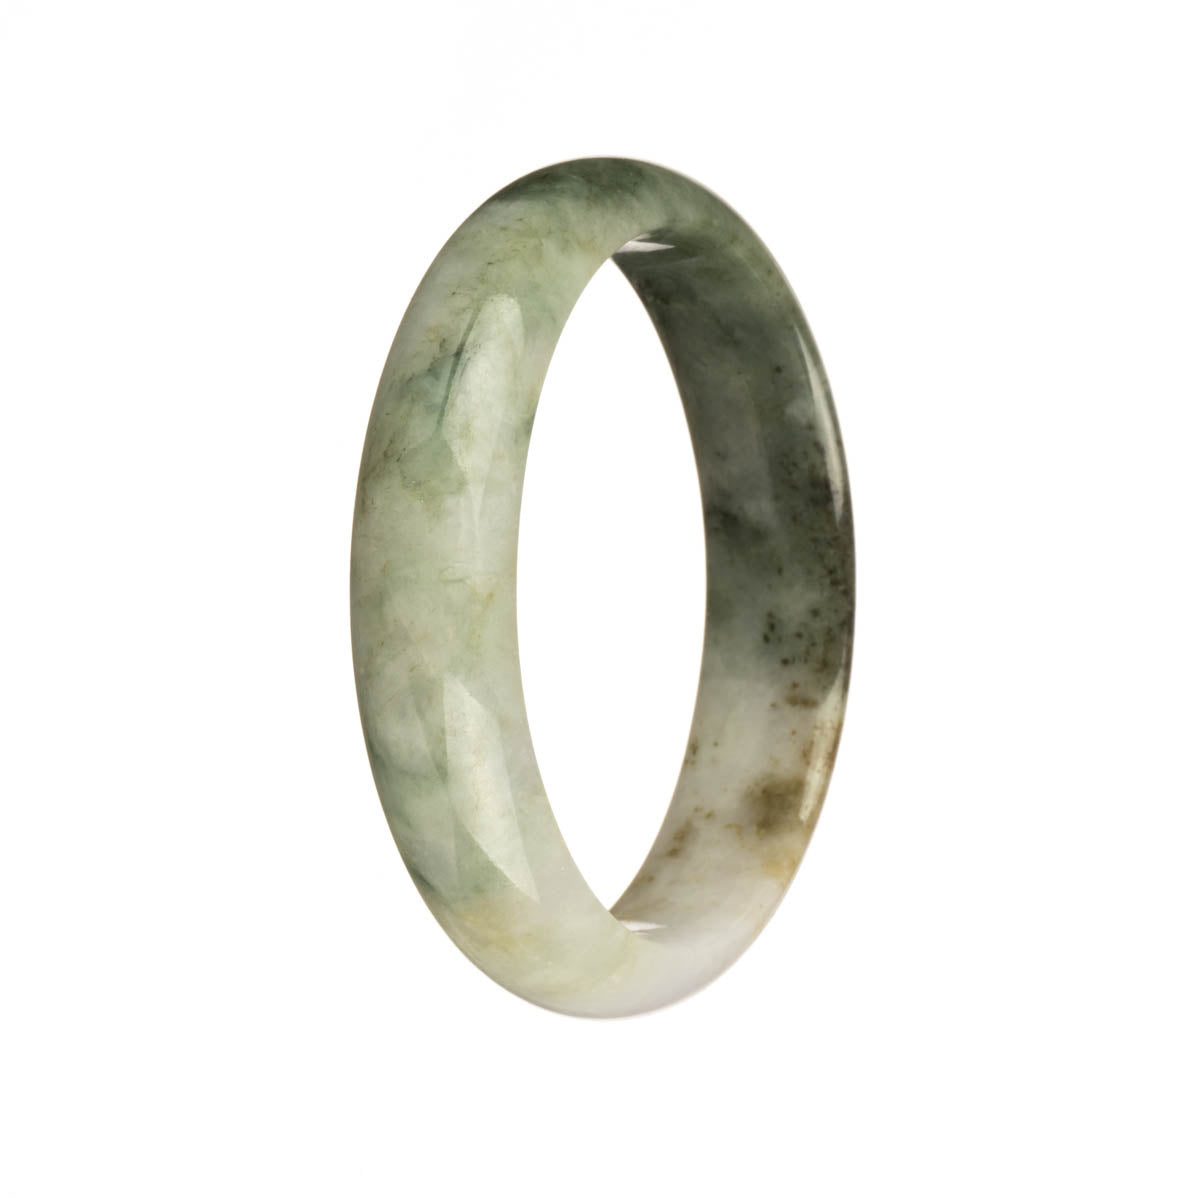 A close-up image of a Burmese Jade bangle bracelet with a half-moon shape. The bracelet features natural untreated jade in shades of white, dark green, brown, and green spots. It exudes an authentic and earthy feel.